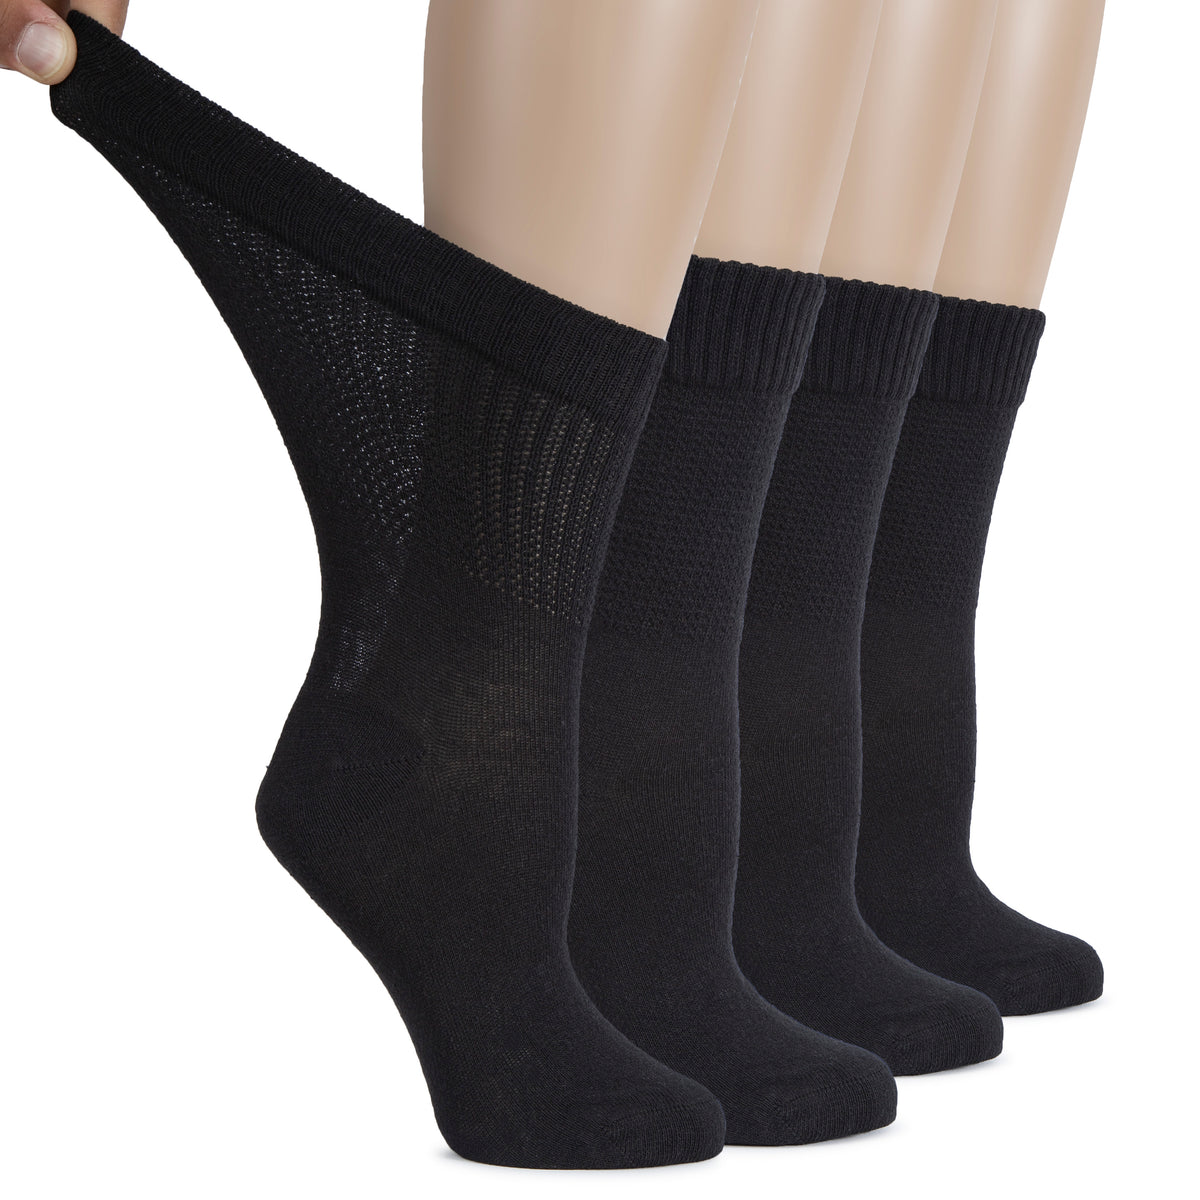 Hugh Ugoli Cotton Diabetic Women's Socks, Crew, Loose, Wide Stretchy, Thin, Seamless Toe and Non-Binding Top, 4 Pairs | Shoe Size: 9-12 | Navy Blue